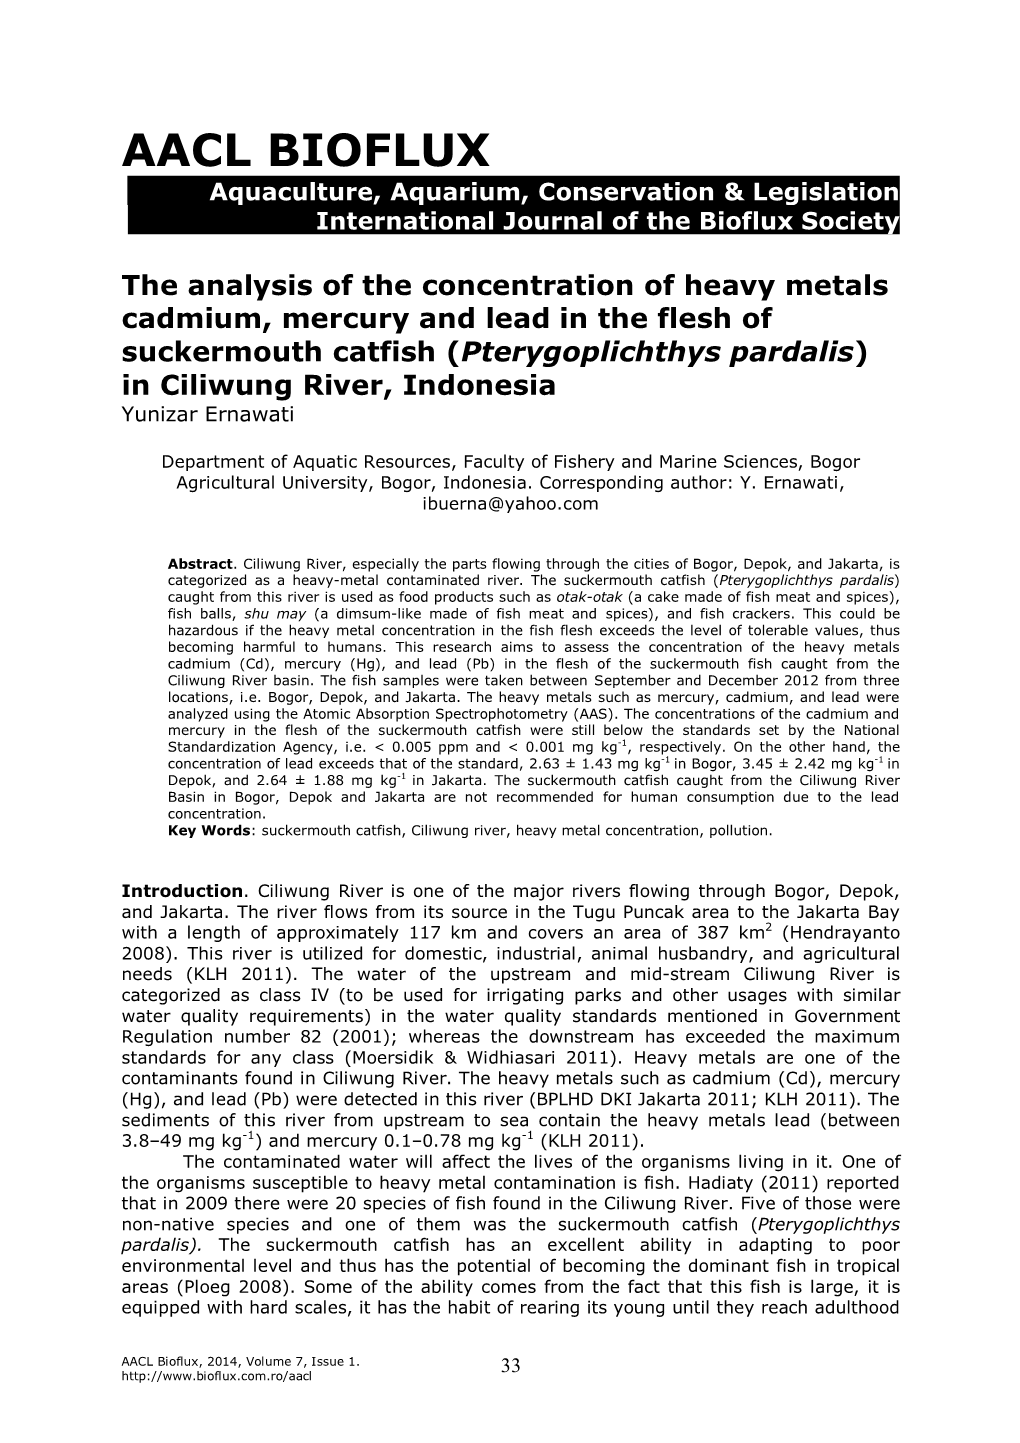 The Analysis of the Concentration of Heavy Metals Cadmium, Mercury and Lead in the Flesh of Suckermouth Catfish (Pterygoplichthys Pardalis) in Ciliwung River, Indonesia